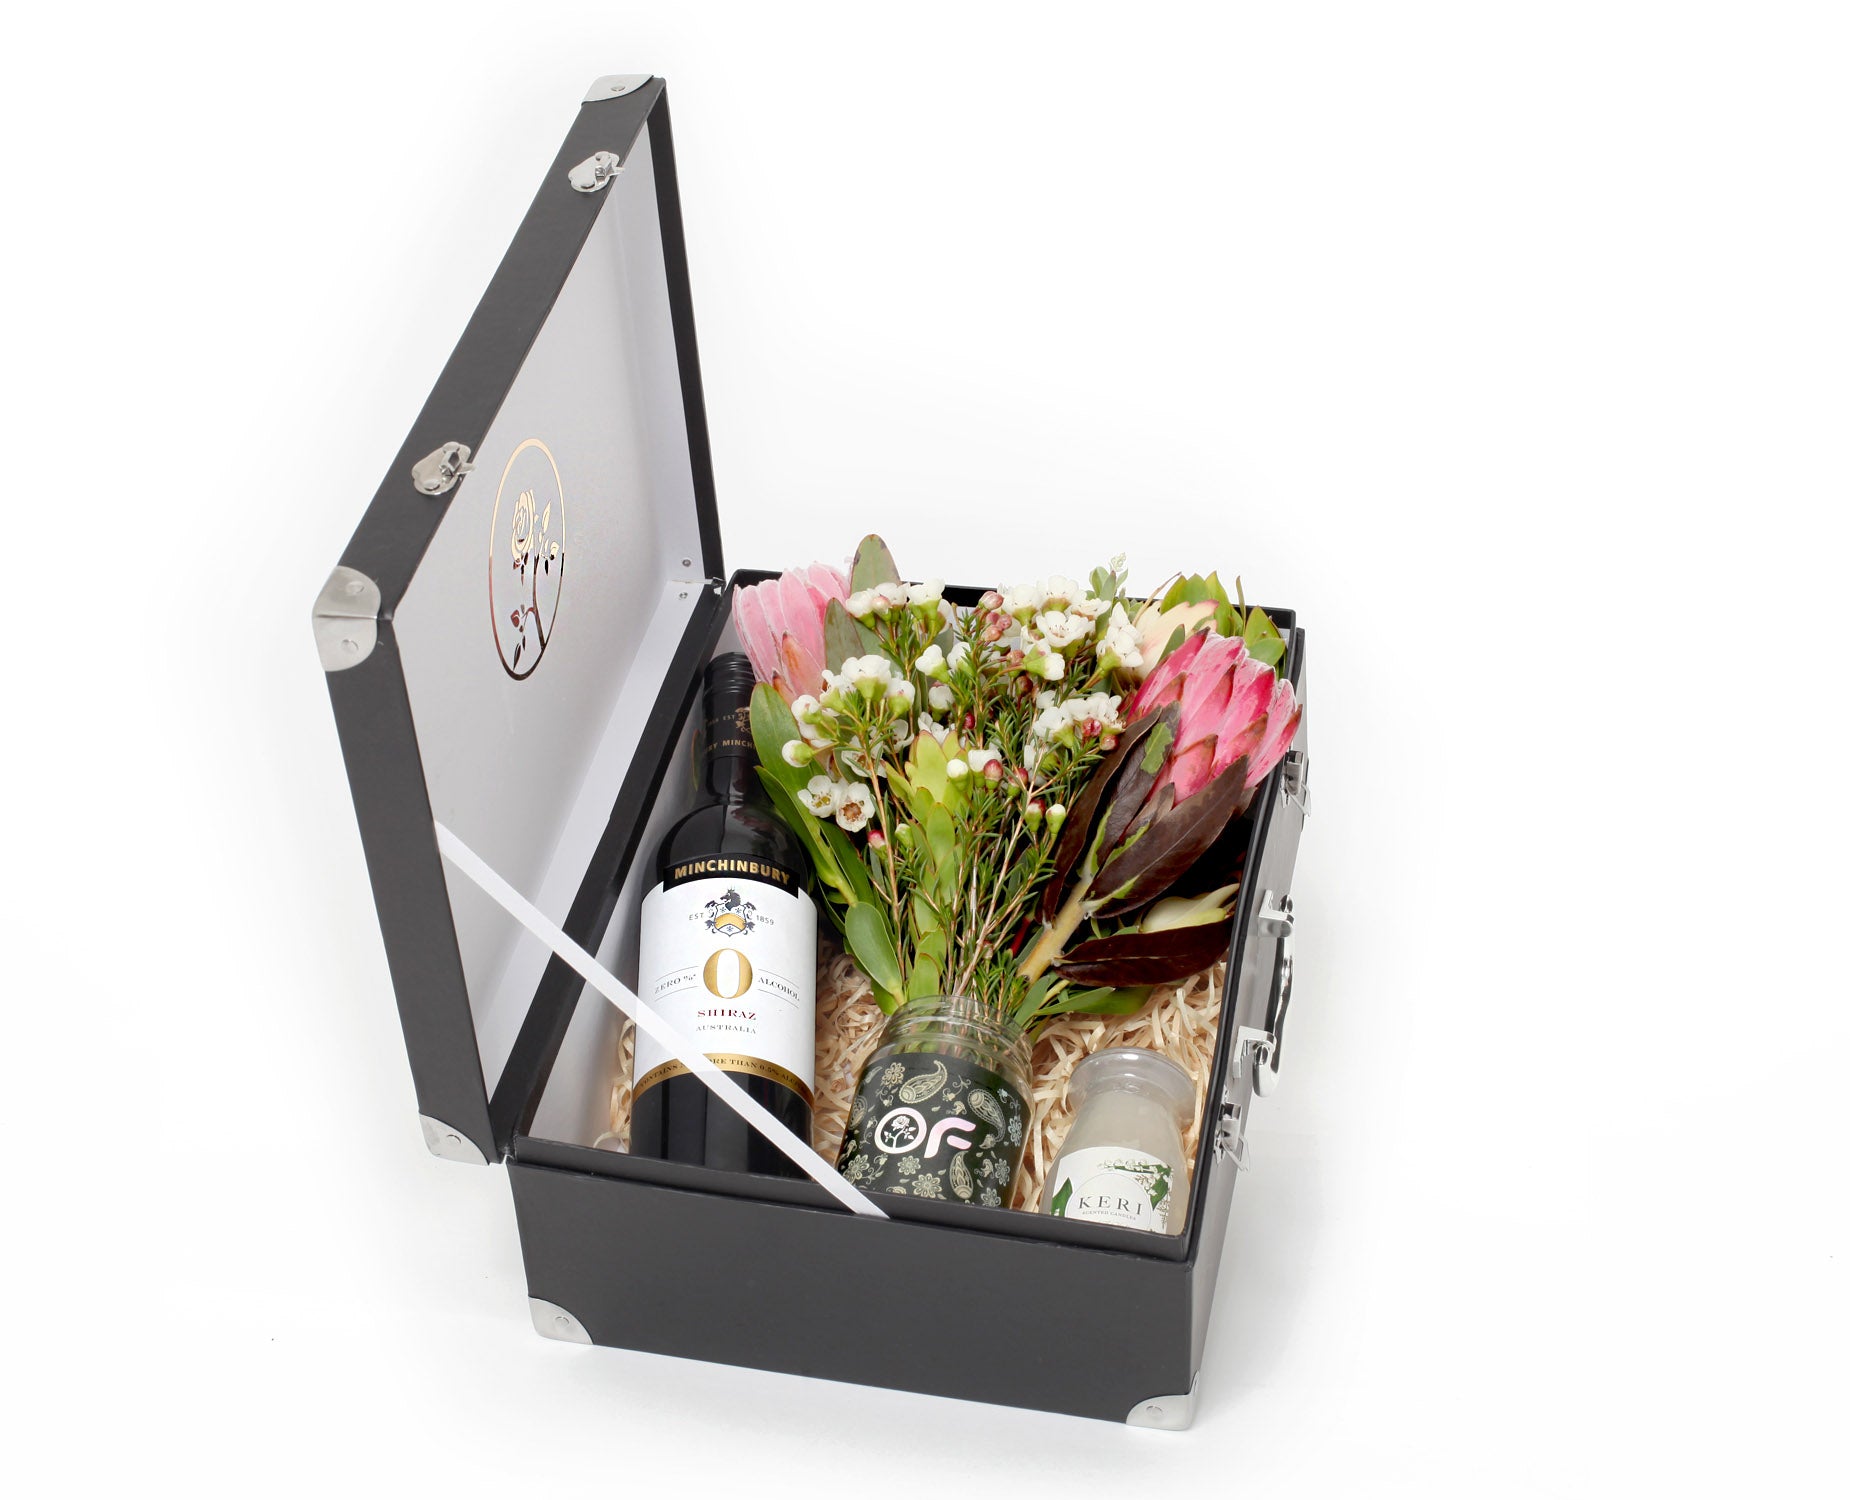 Luxury flowers for father's day - Office flower